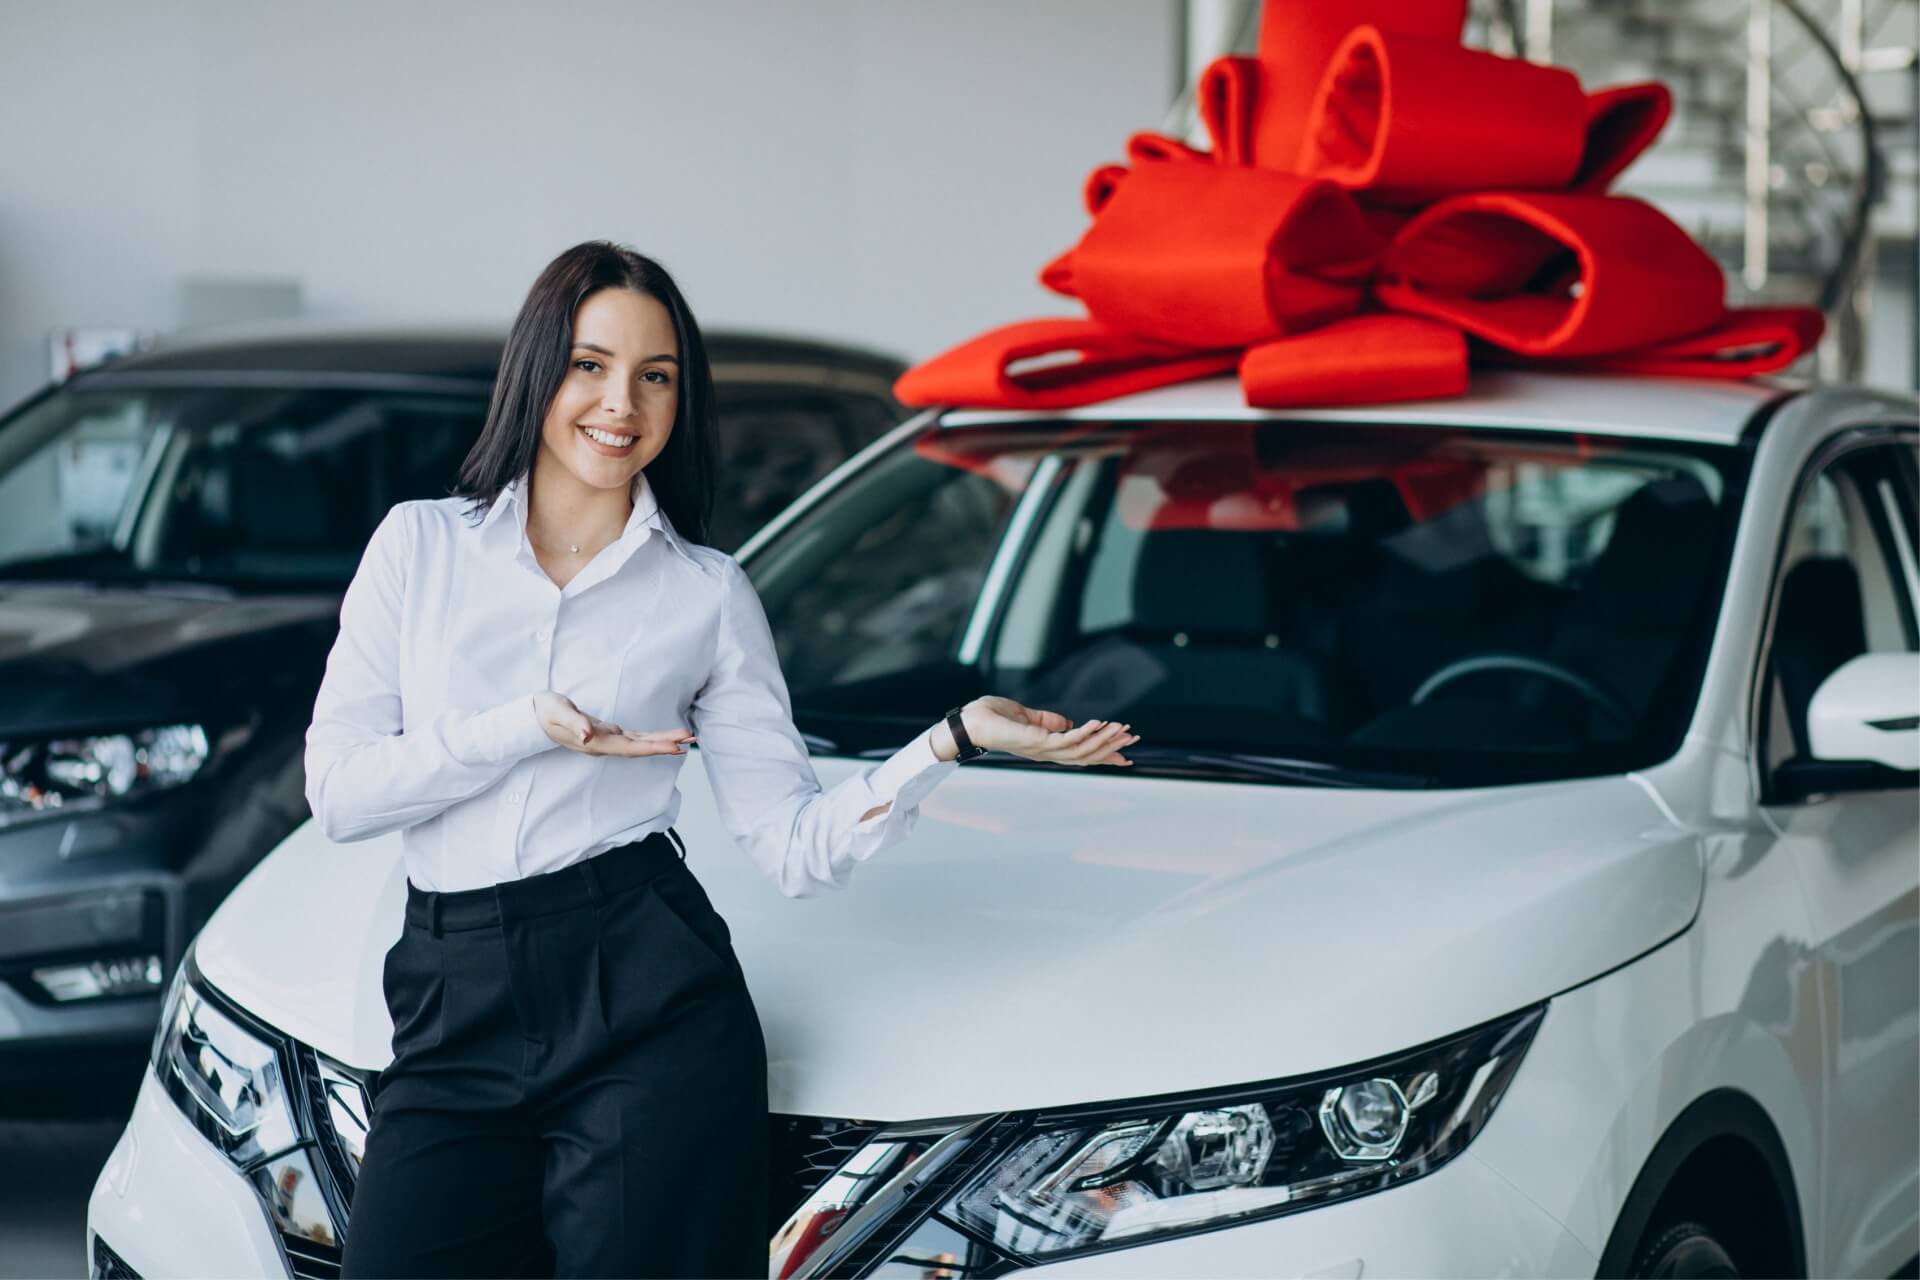 woman by car with big red bow